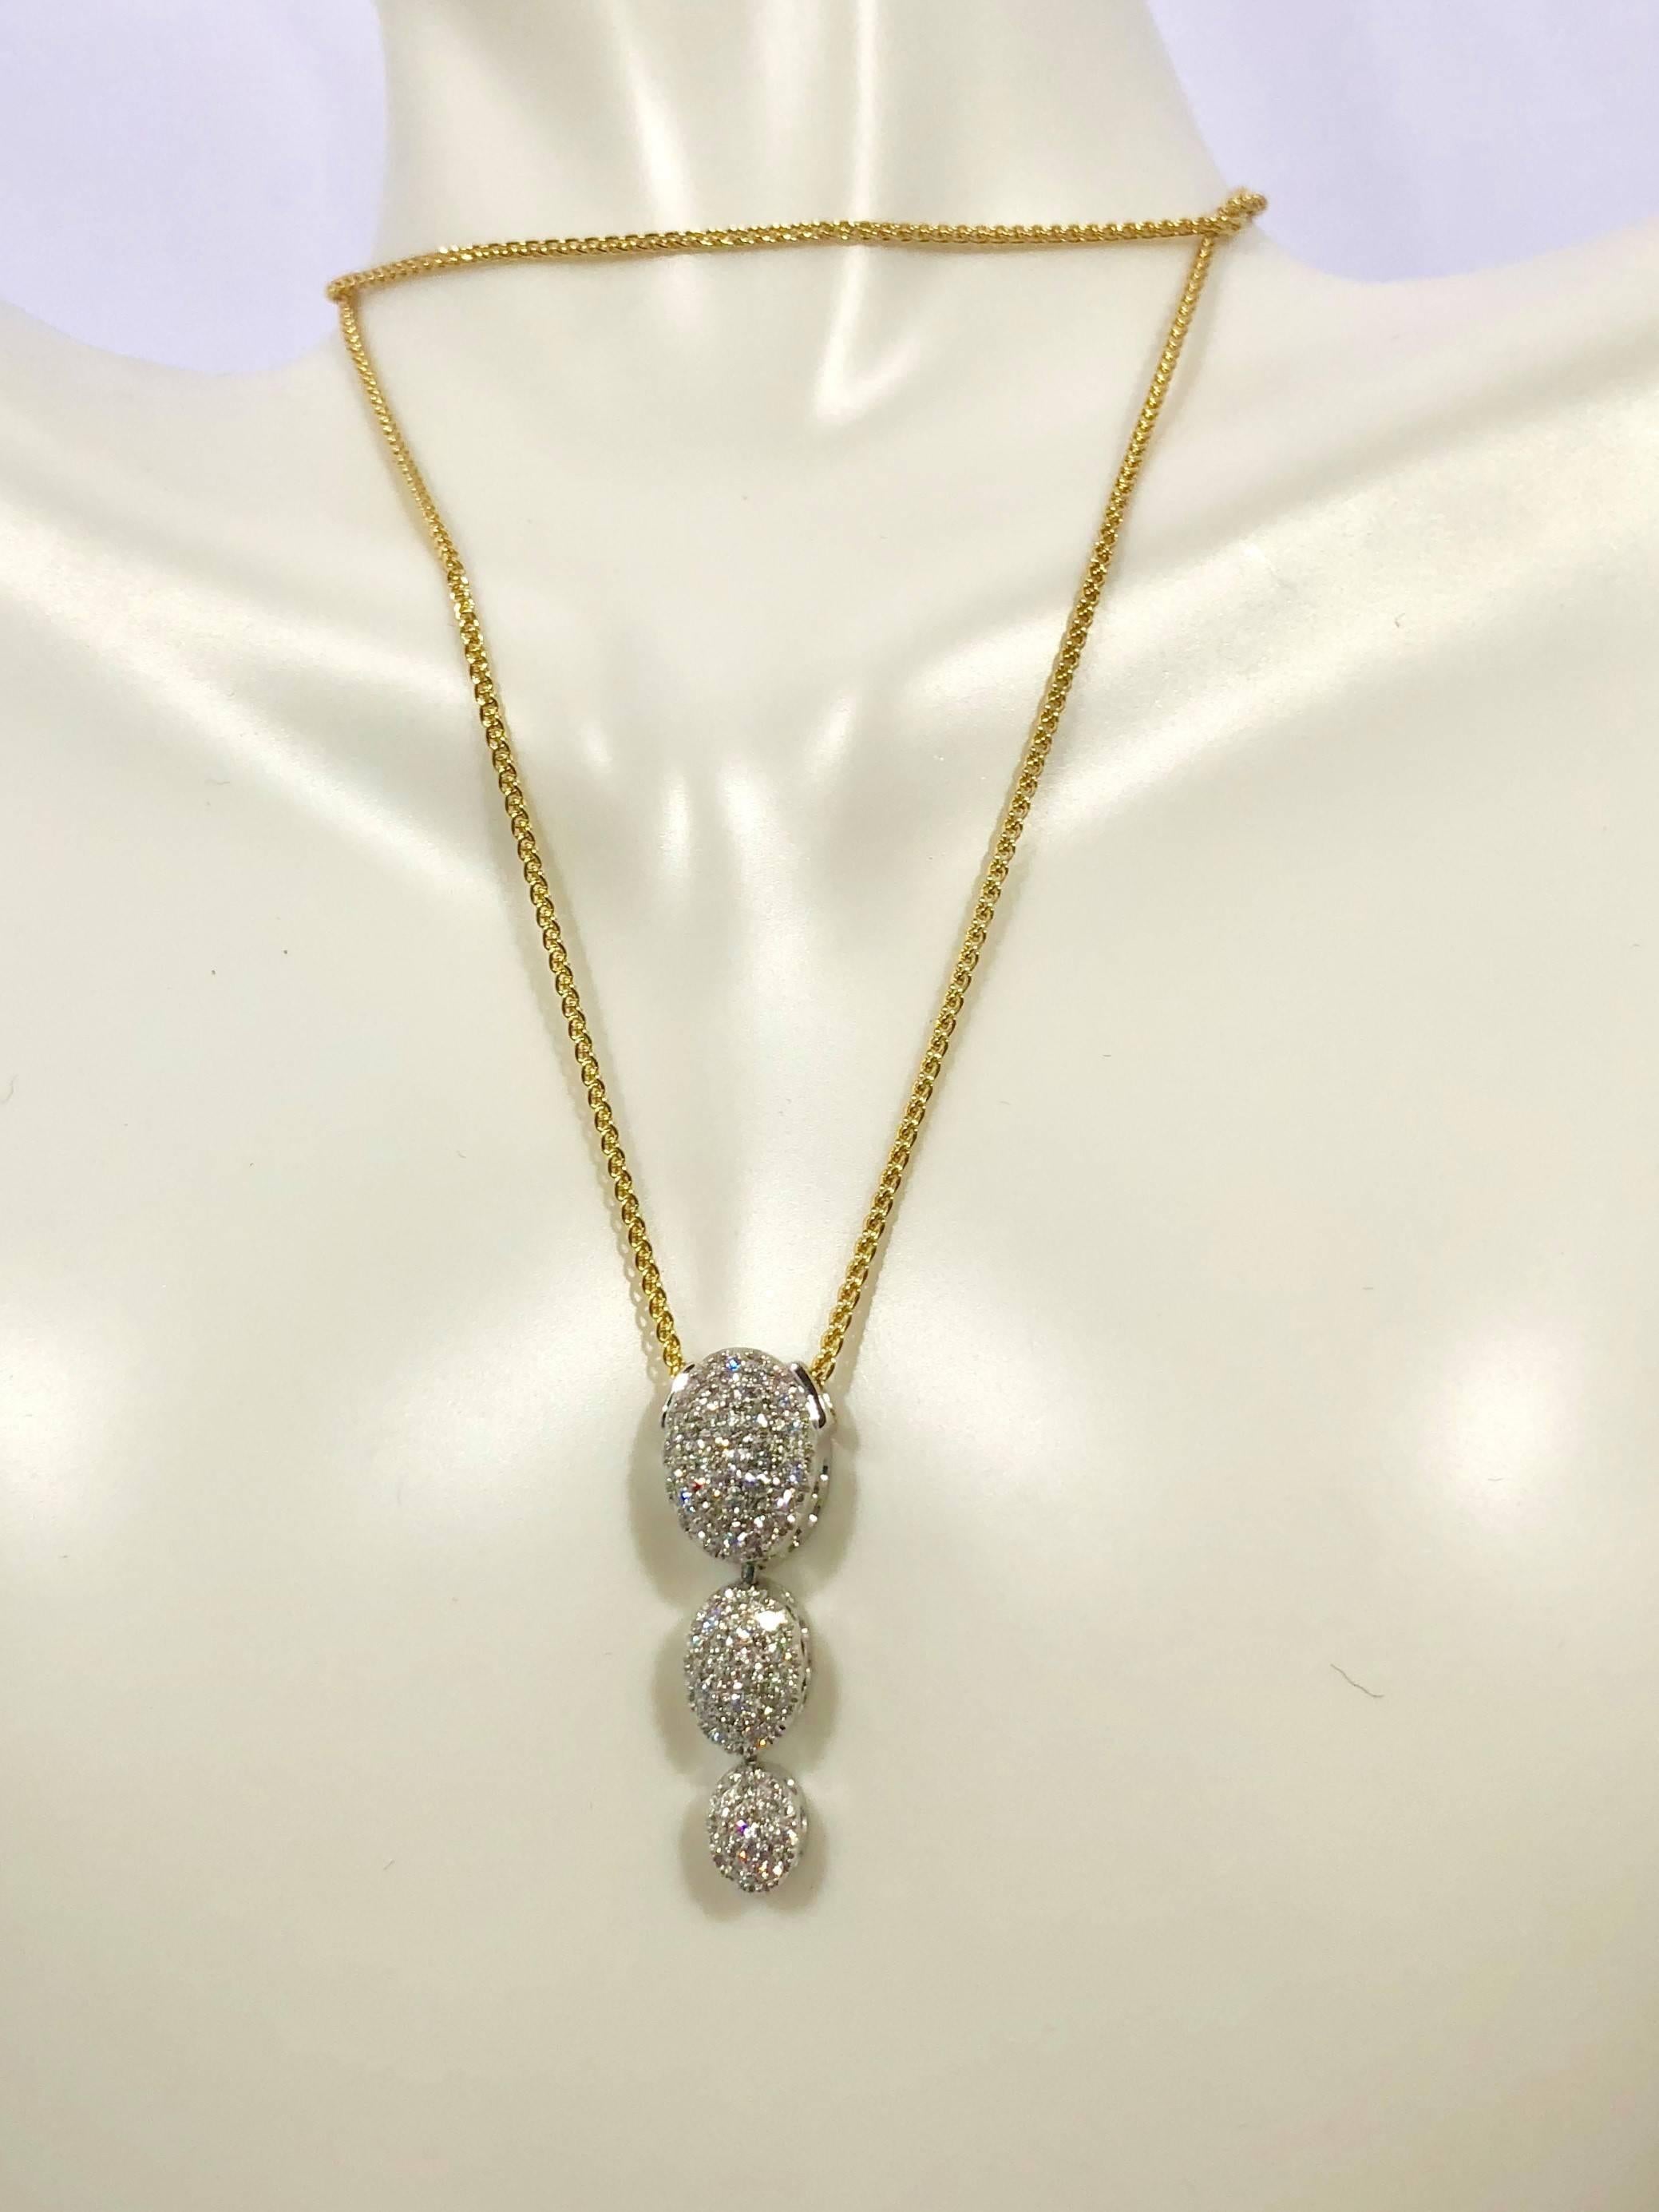 18 Karat white gold diamond pendant by Kurt Gutman, 48- full cut round diamonds = .52 carat total weight, average color G-H, average clarity VS2-SI1, approx. one inch long, weighing 4.5grams/2.9dwt., insurance appraisal provided upon purchase.